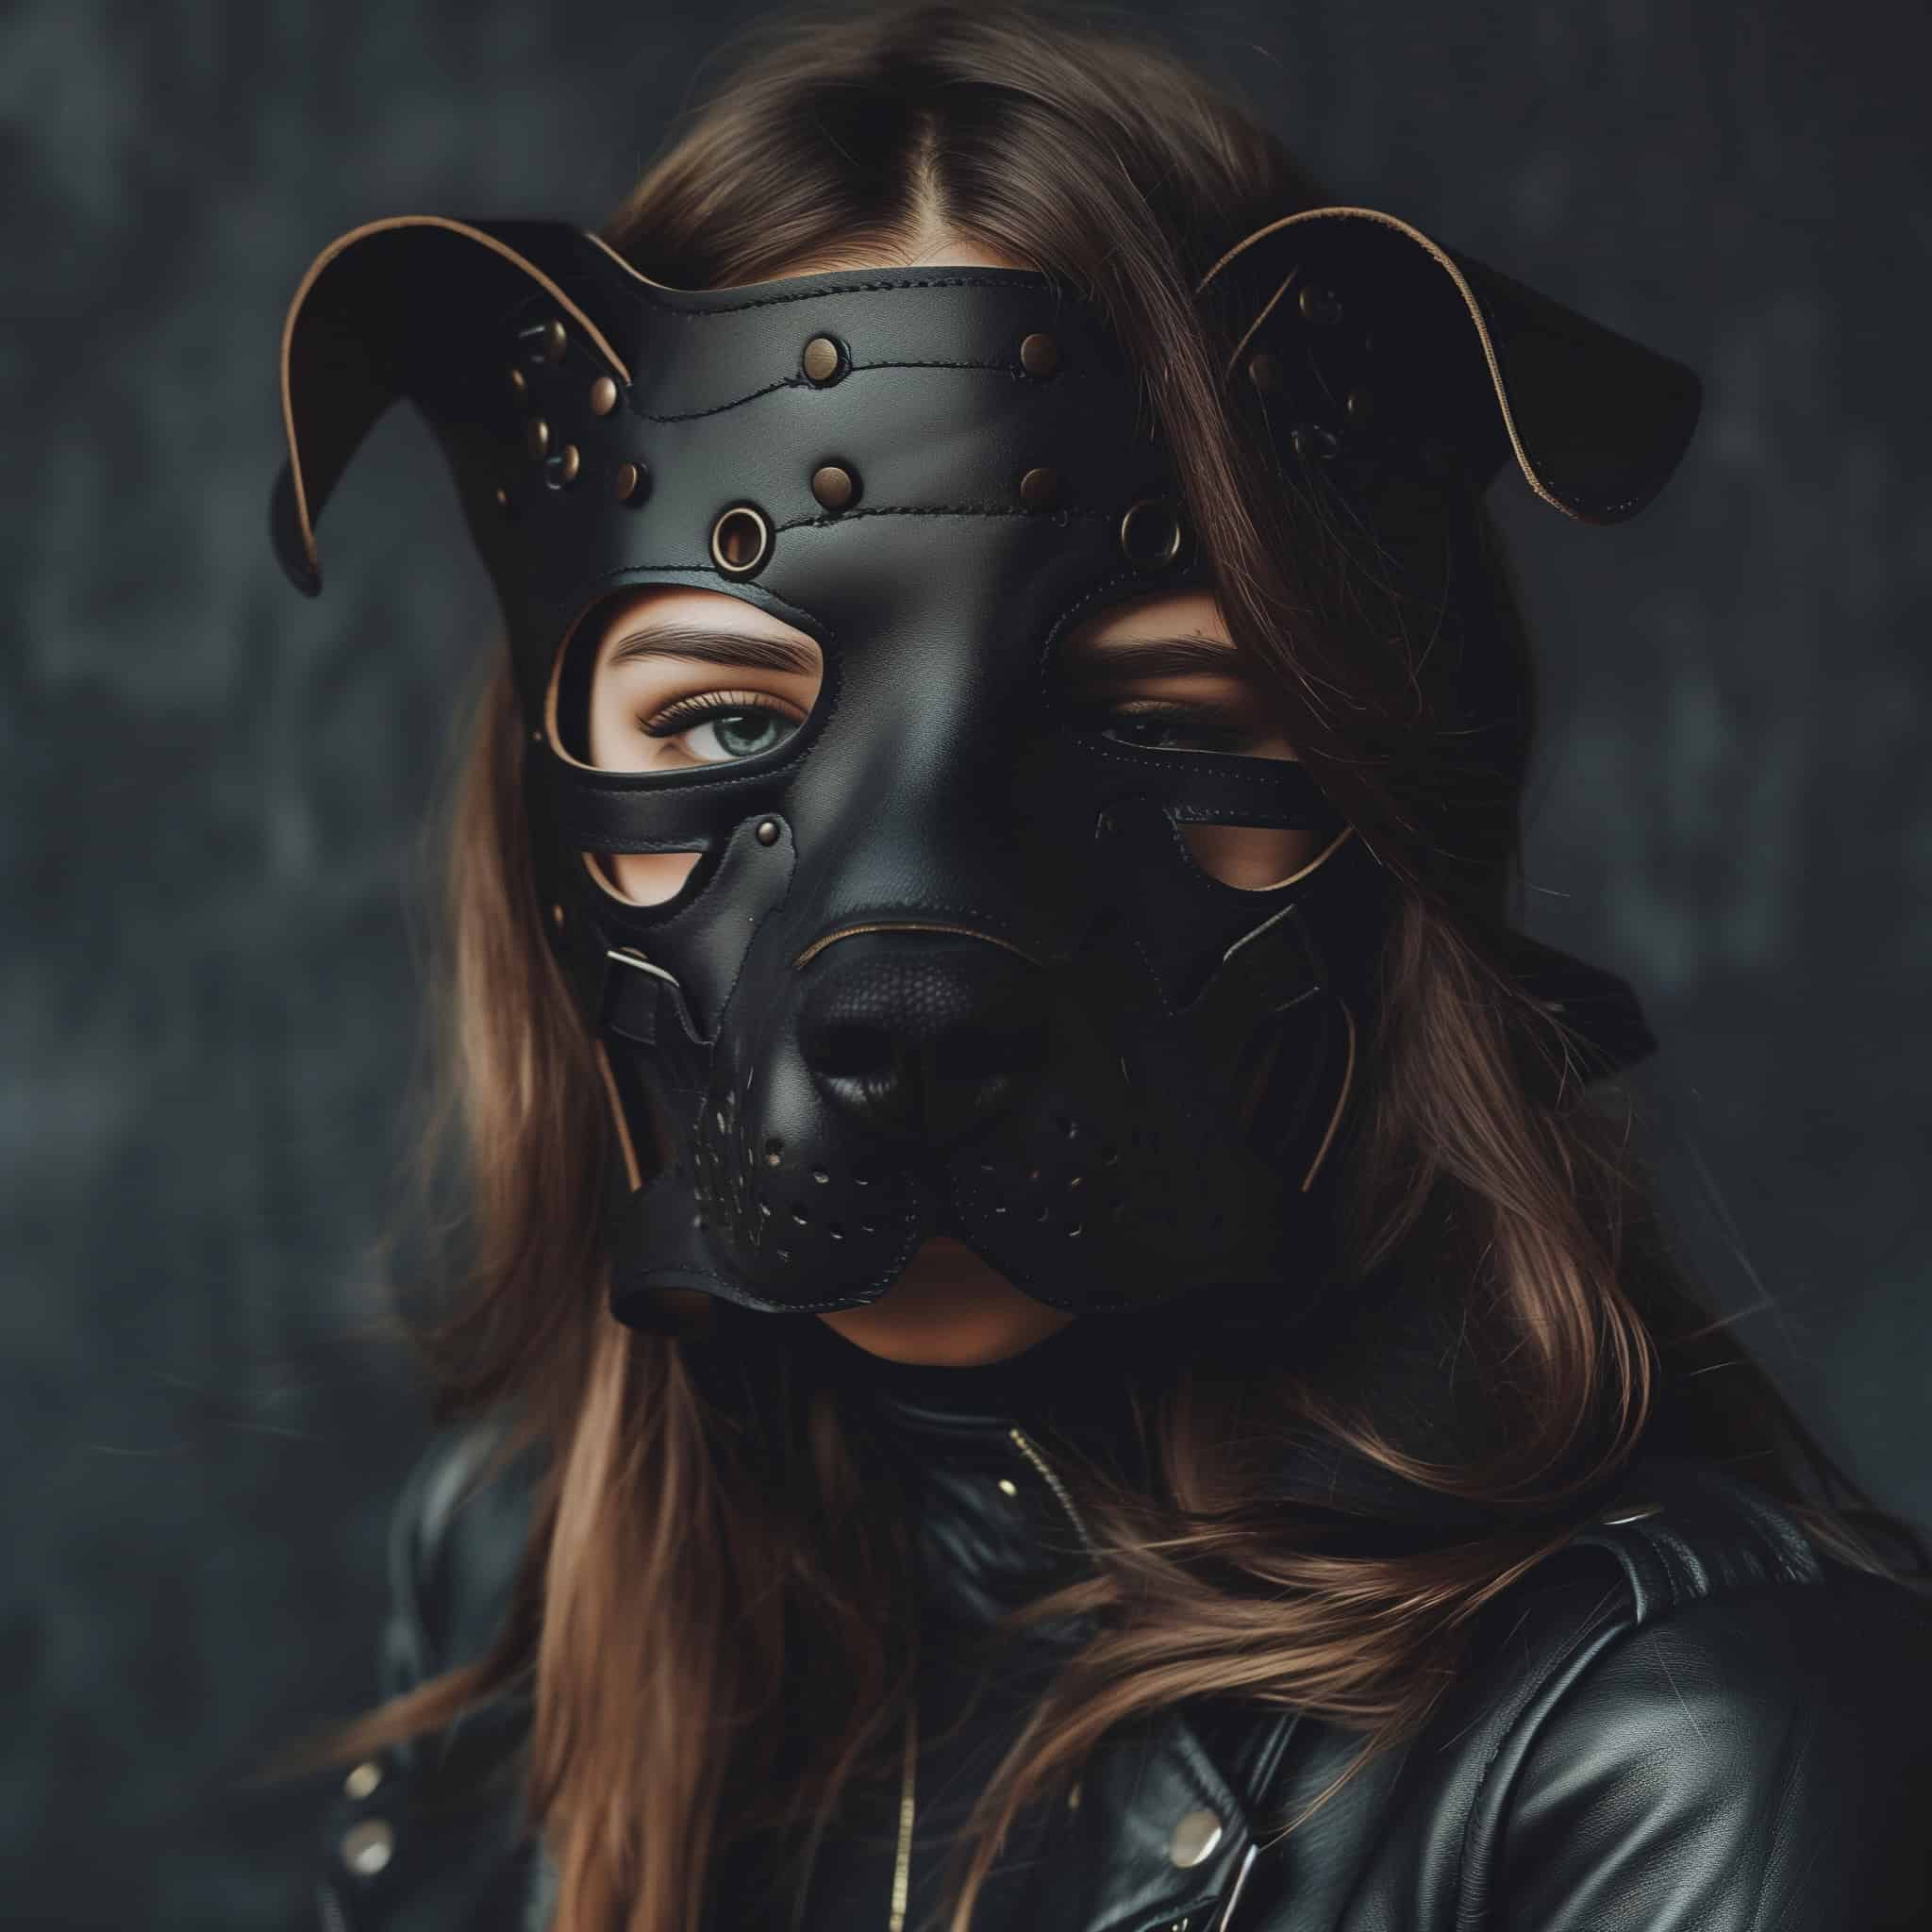 Submissive Woman Wearing A Leather Puppy Mask Loves Being Trained By Her Master